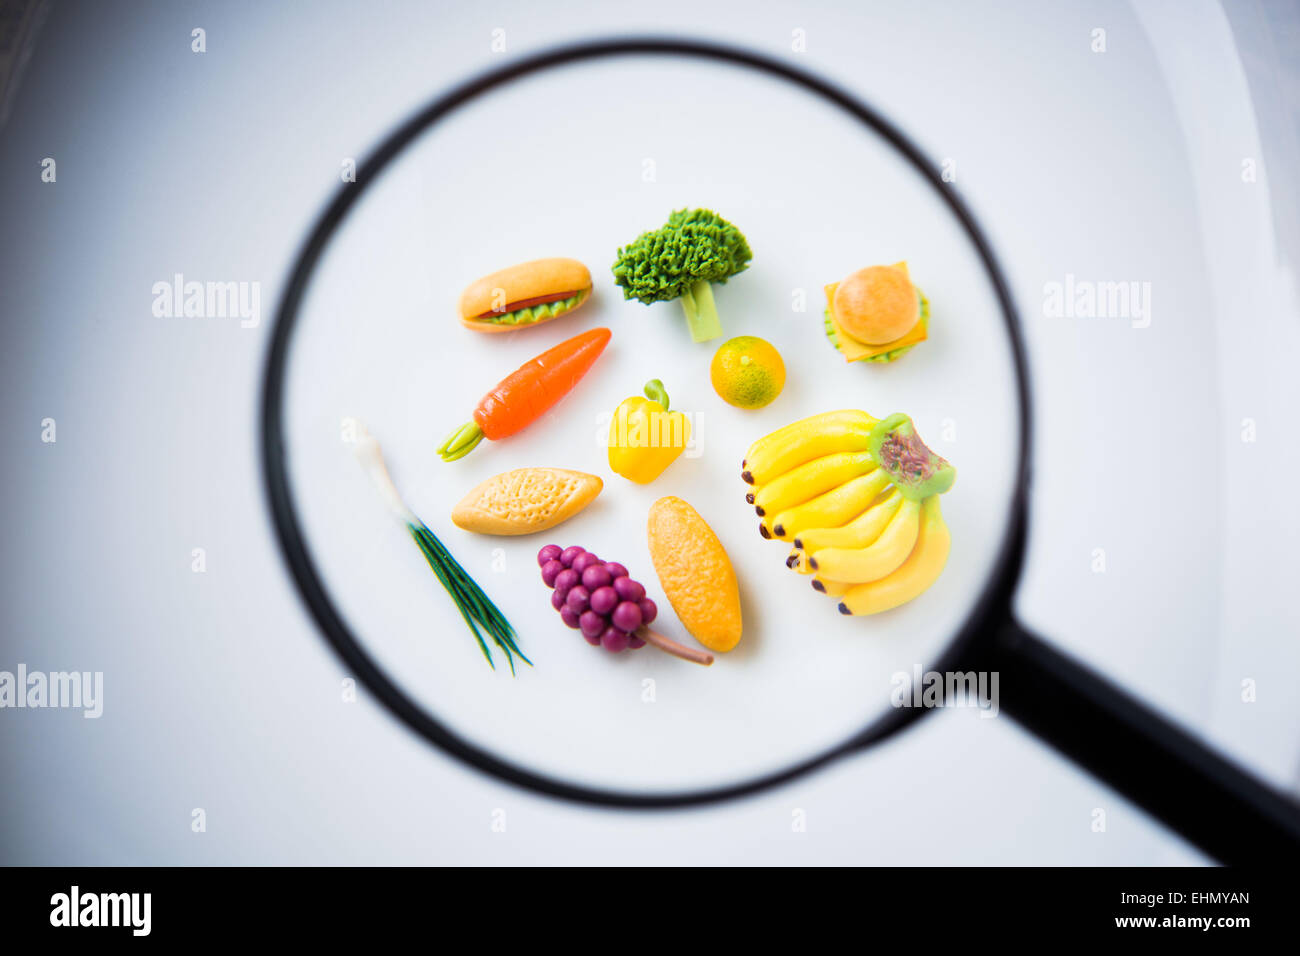 Food and magnifying glass. Stock Photo